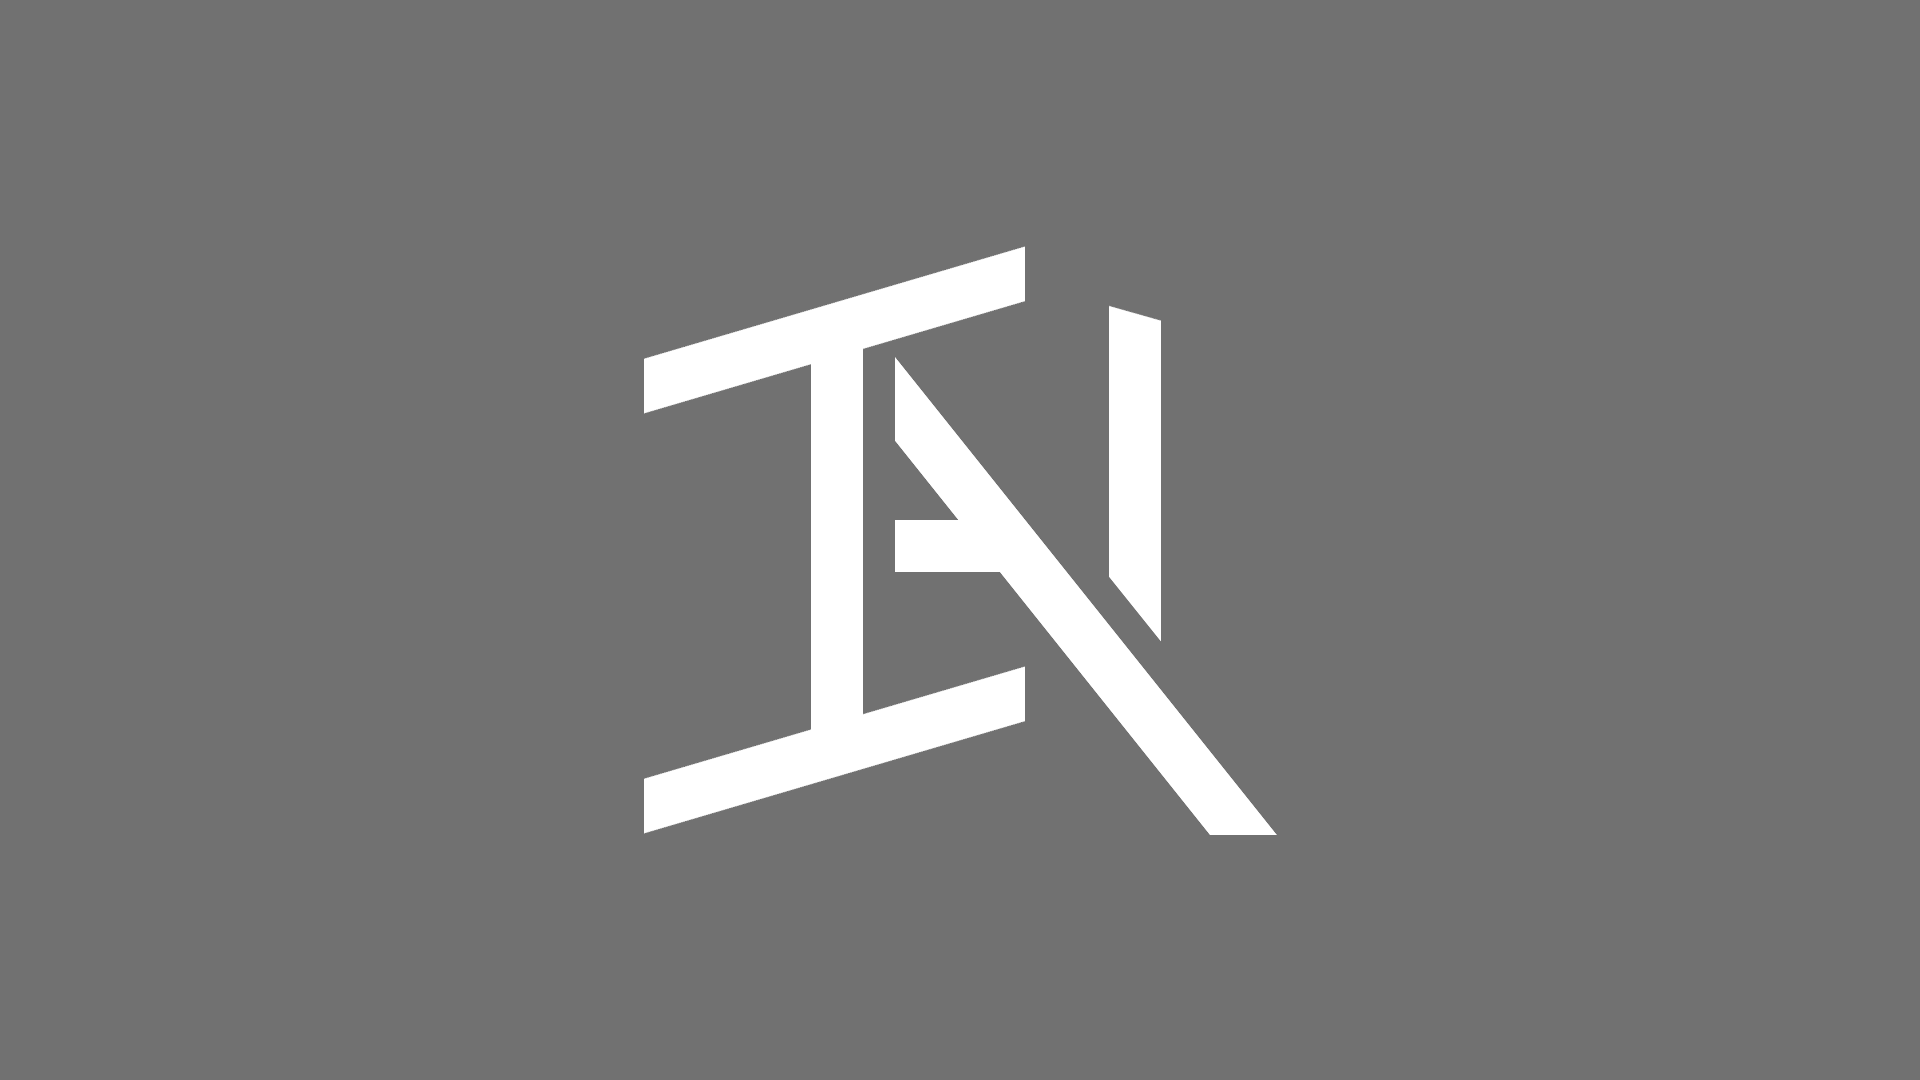 Ian Logo - Wanting to make a personal logo for (mostly) youtube use. Any tips